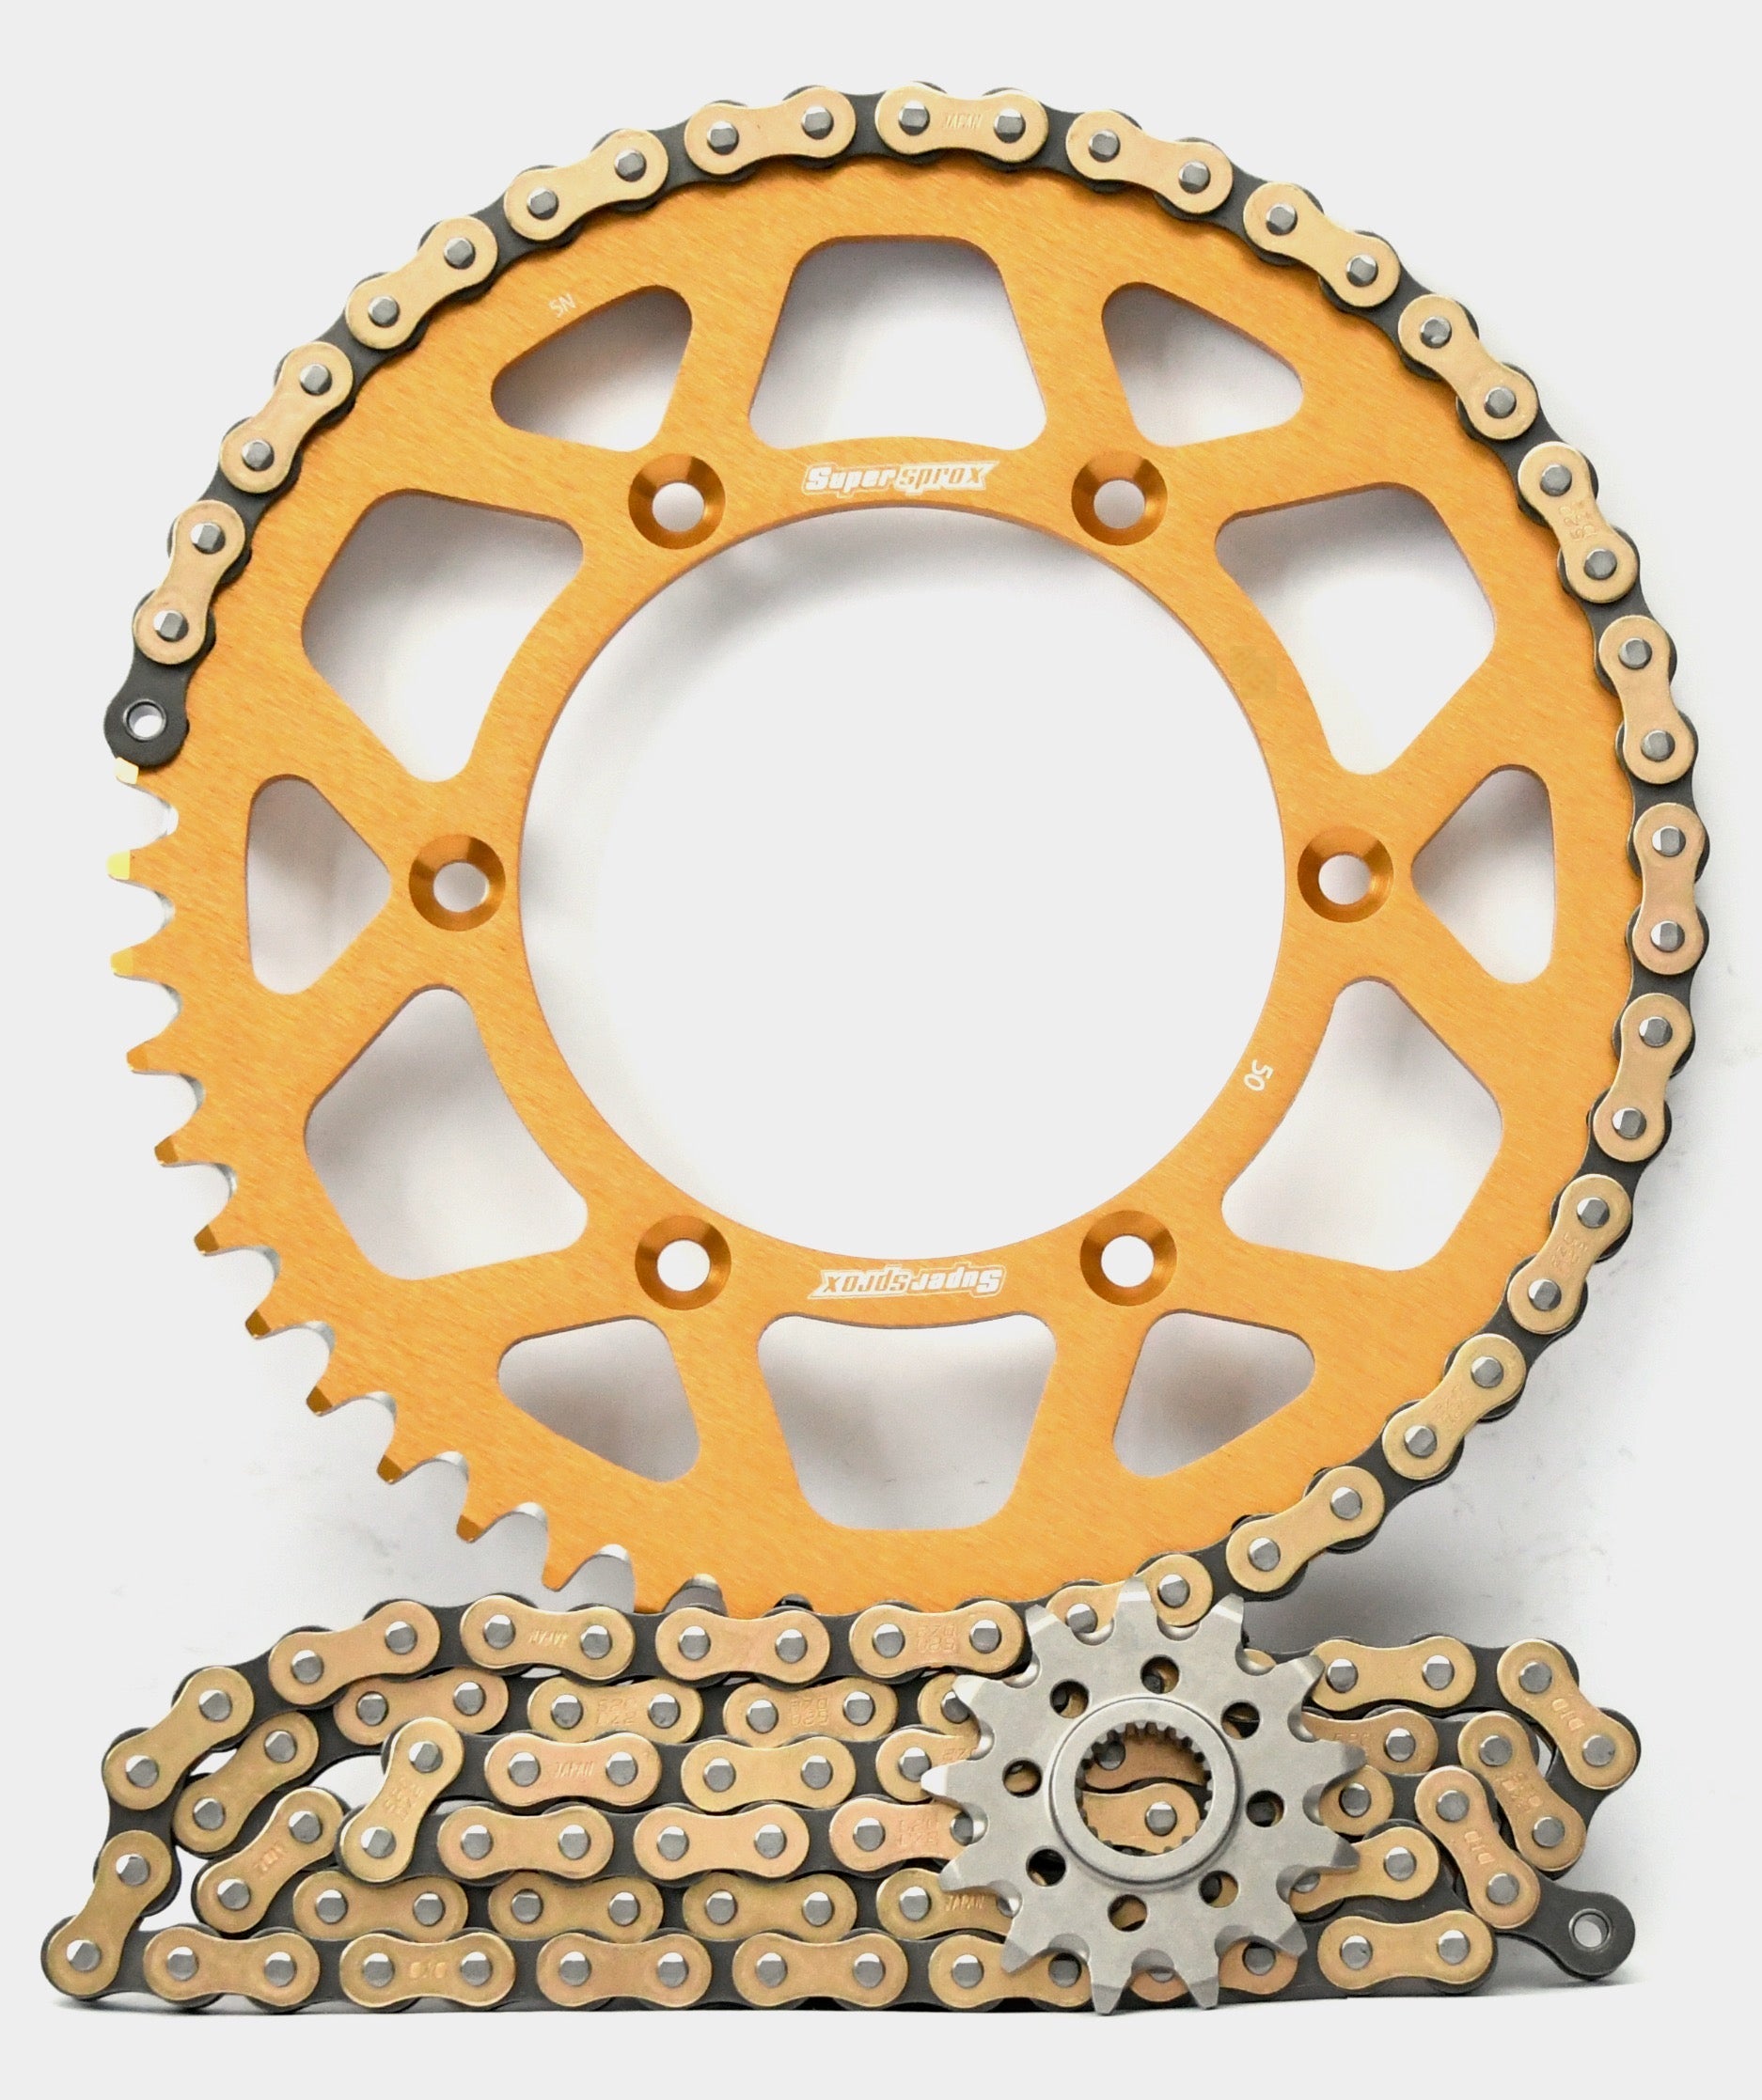 Supersprox Chain & Aluminium Sprocket Kit for Honda CR125R 1998-2003 - Choose Your Gearing